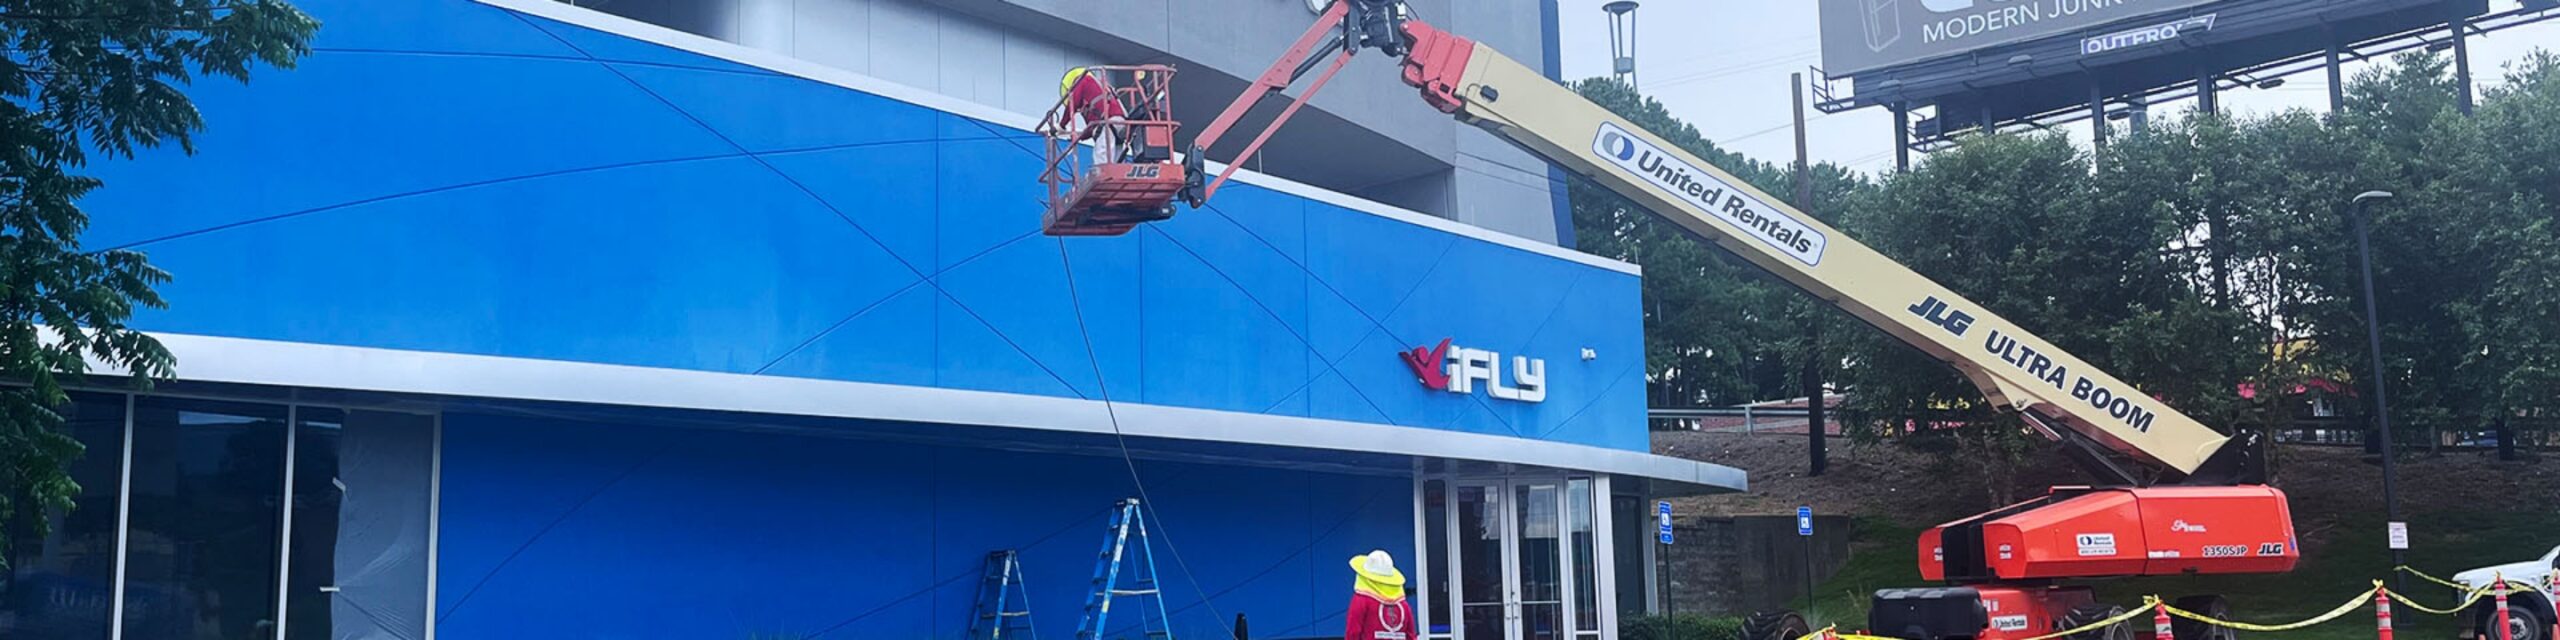 nationwide commercial painting| Commercial Painting - iFly | Harrison Contracting 